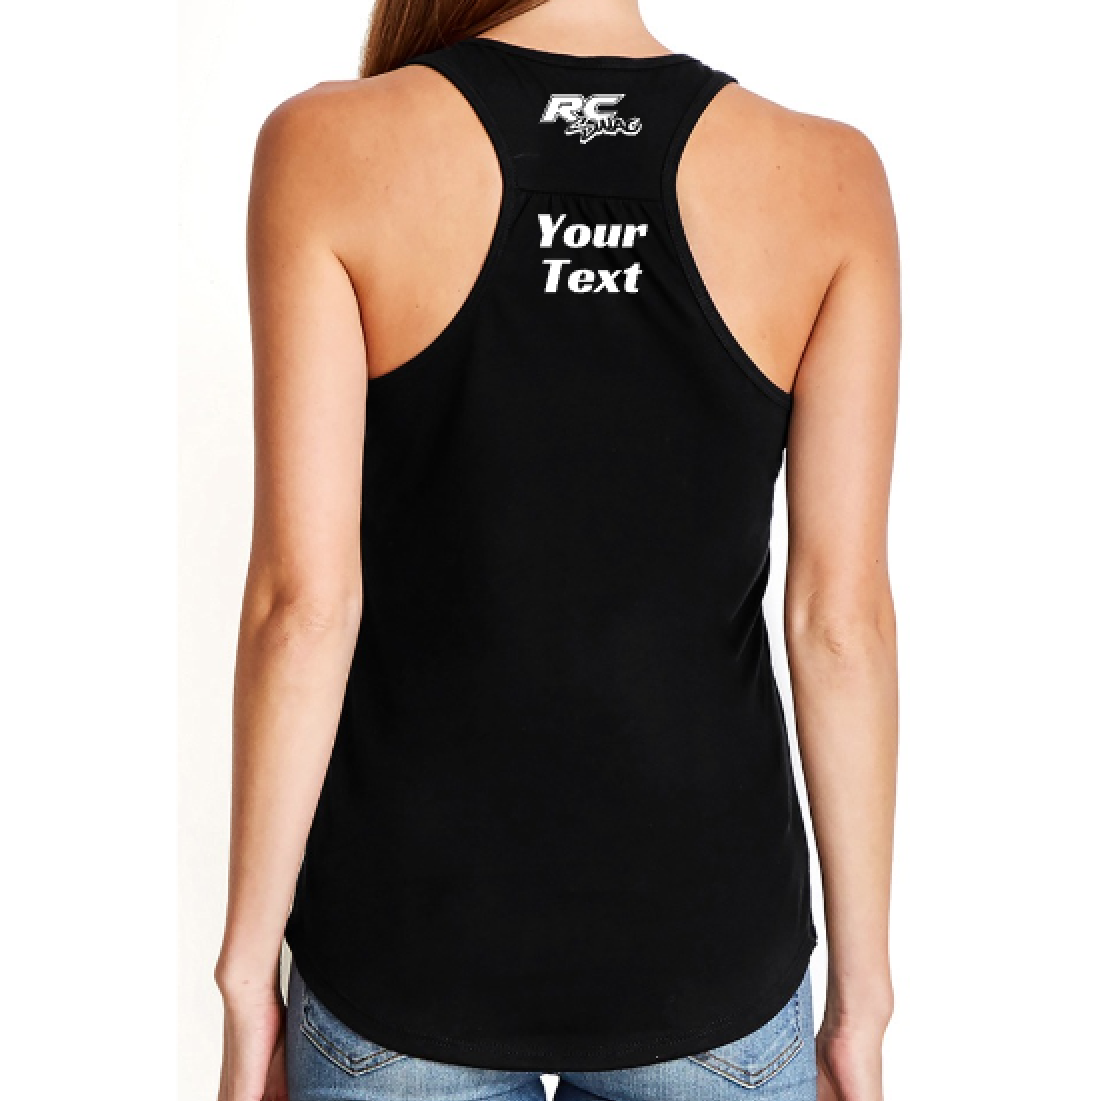 Wedge Måler Sult Ladies RC SWAG Logo Gathered Racerback Tank Top - RC SWAG - Stickers, T- Shirts, Hoodies, RC Kits & More!